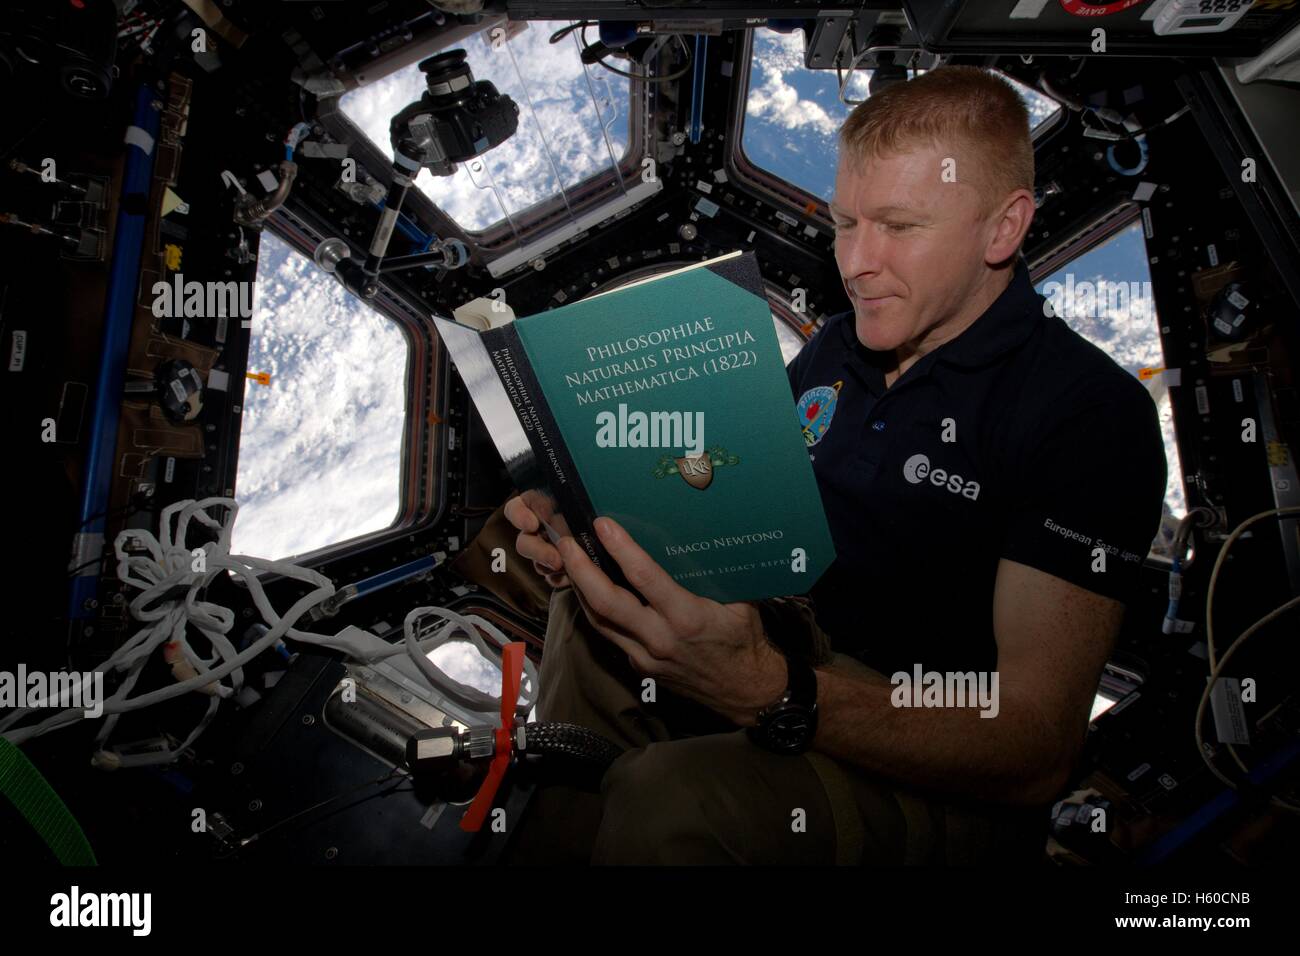 NASA International Space Station Expedition 46 British astronaut Tim Peake reads Principe Mathematica by Isaac Newton during World Book Day February 28, 2016 while in Earth orbit. Stock Photo